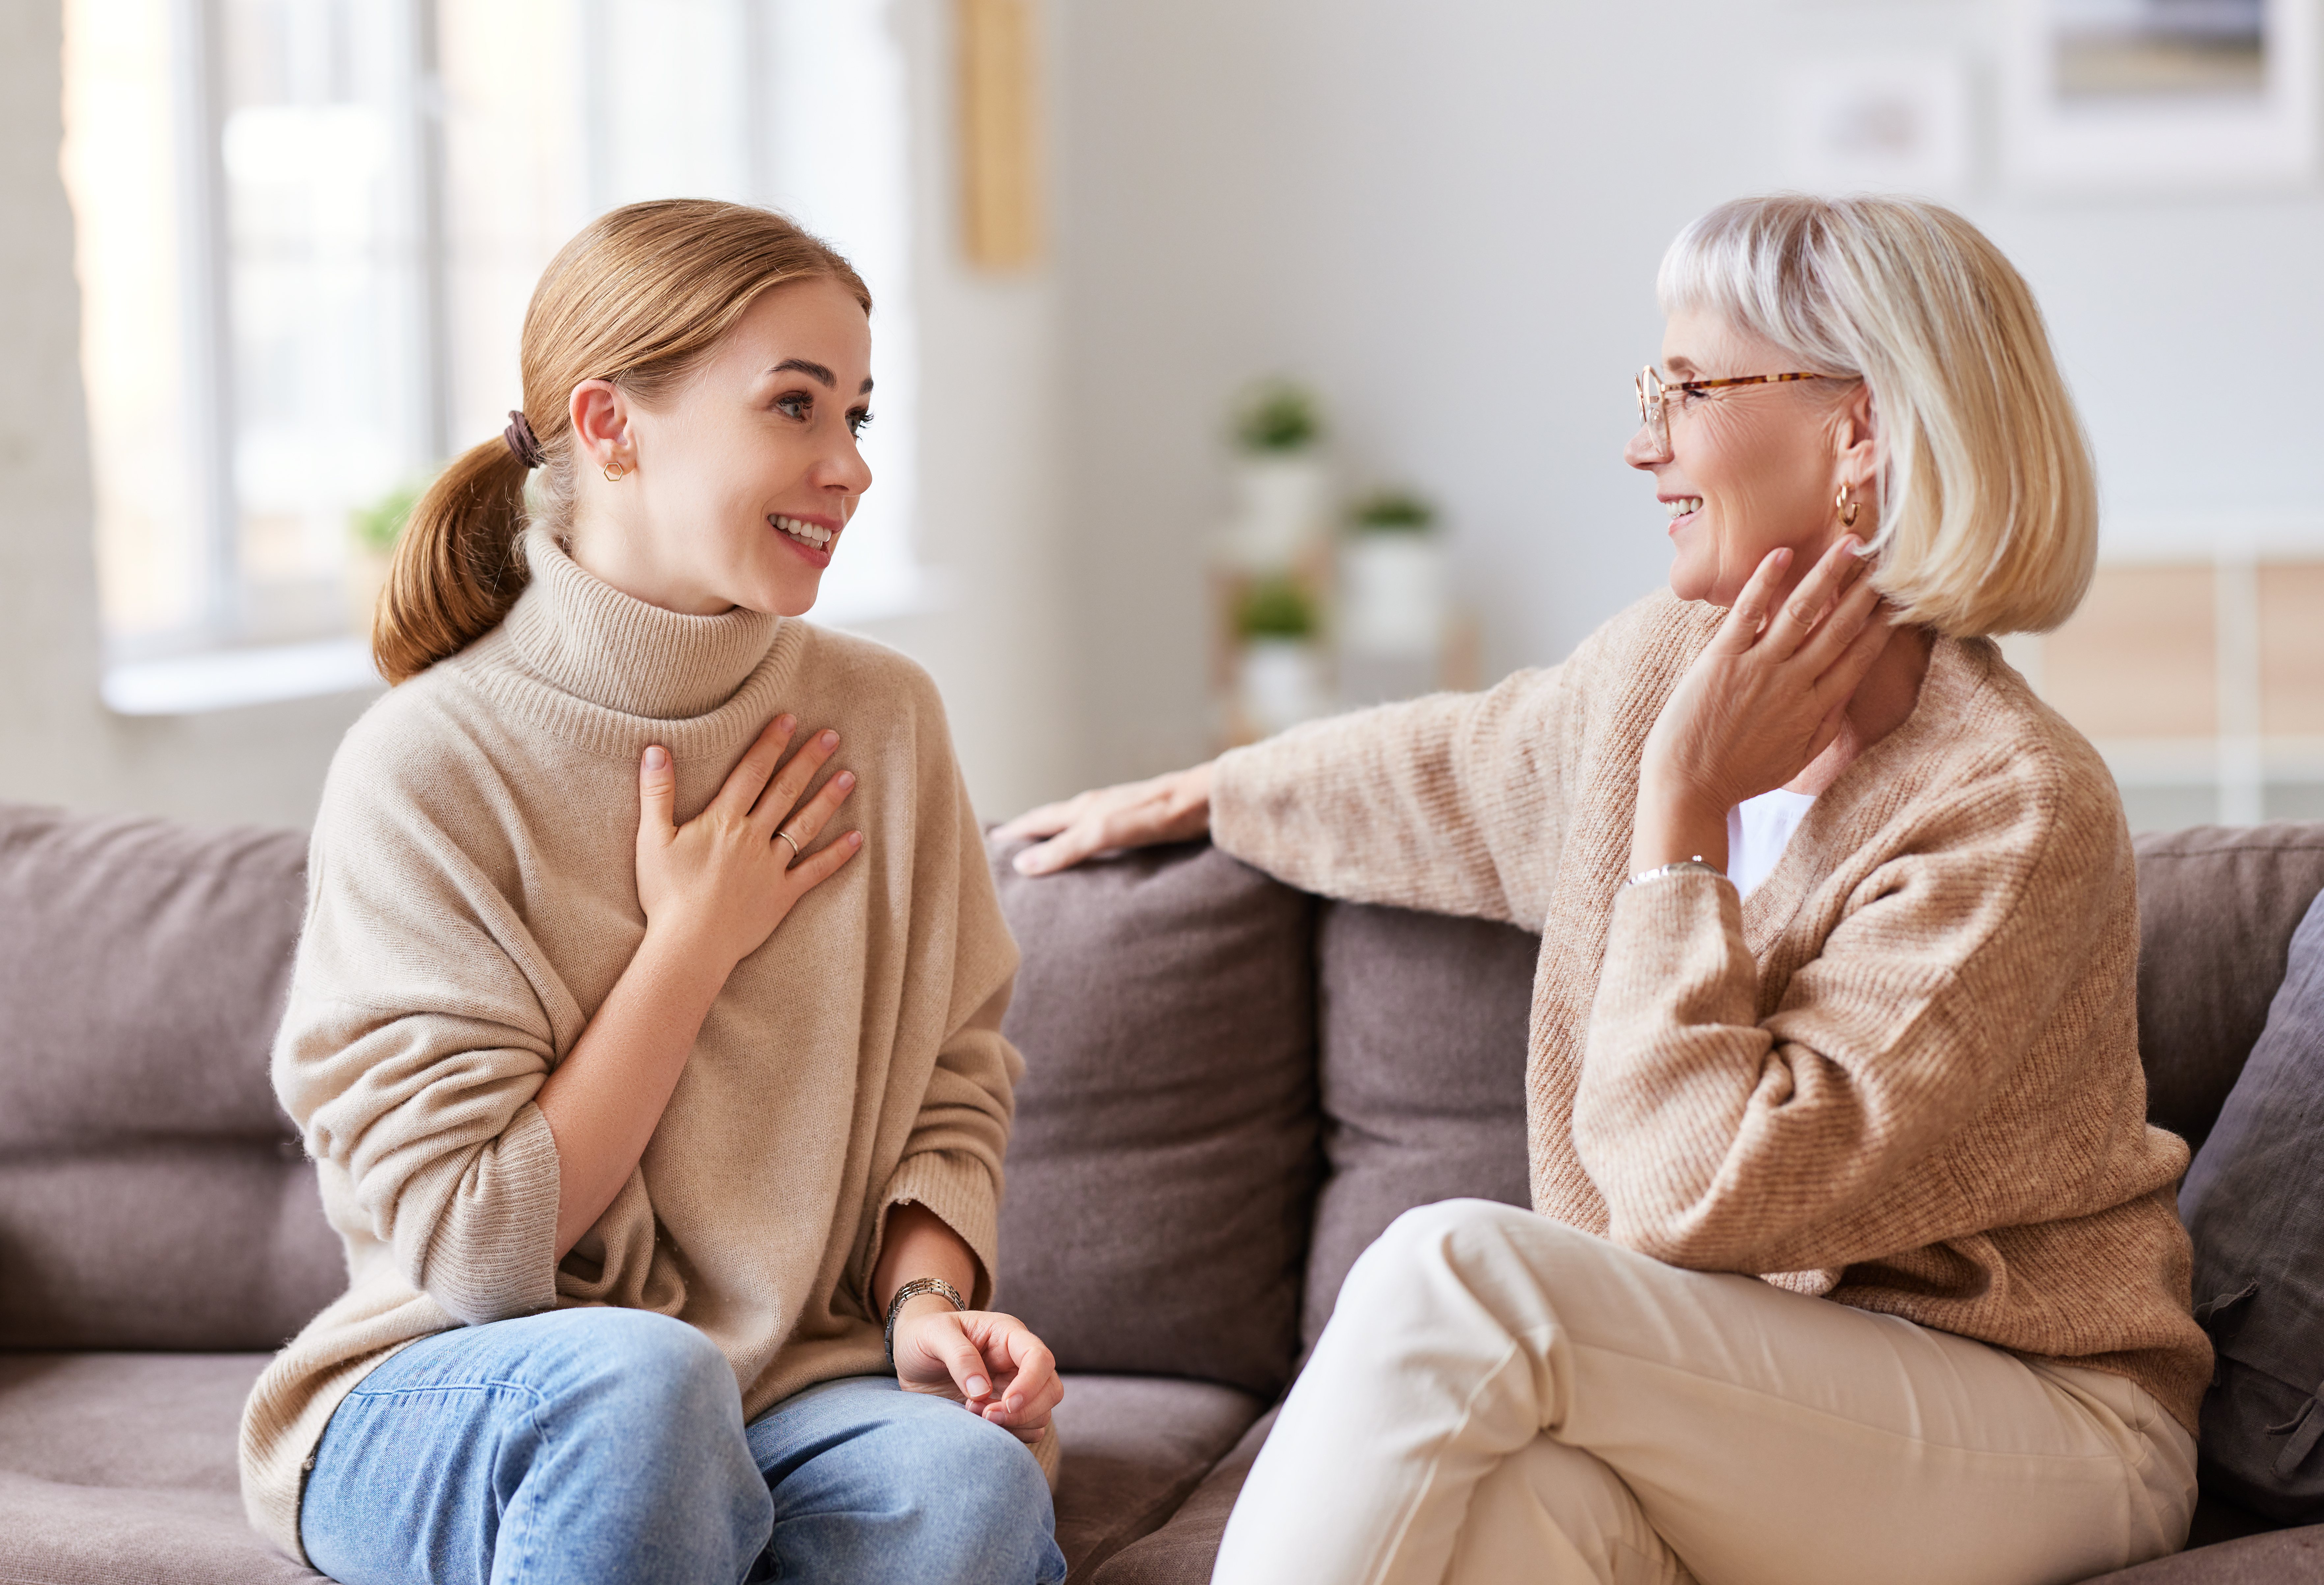 A woman having a nice chat on the couch with her mother-in-law | Source: Shutterstock